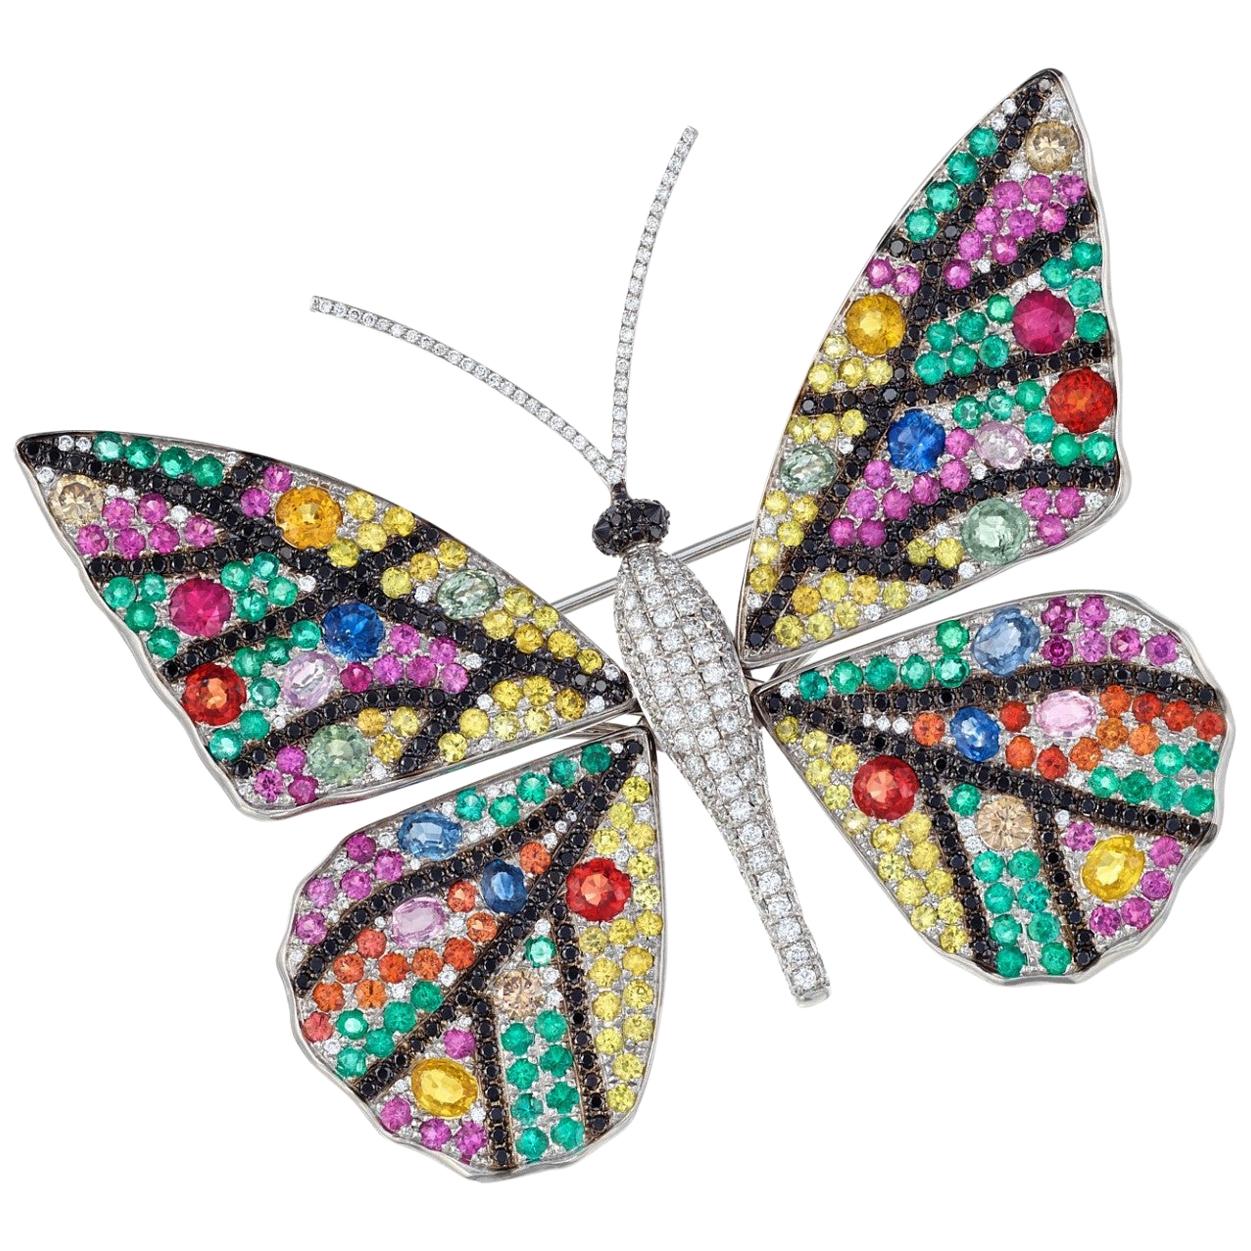 Rosior by Manuel Rosas "Tremblant Butterfly" Multicolor Gemstone Brooch For Sale